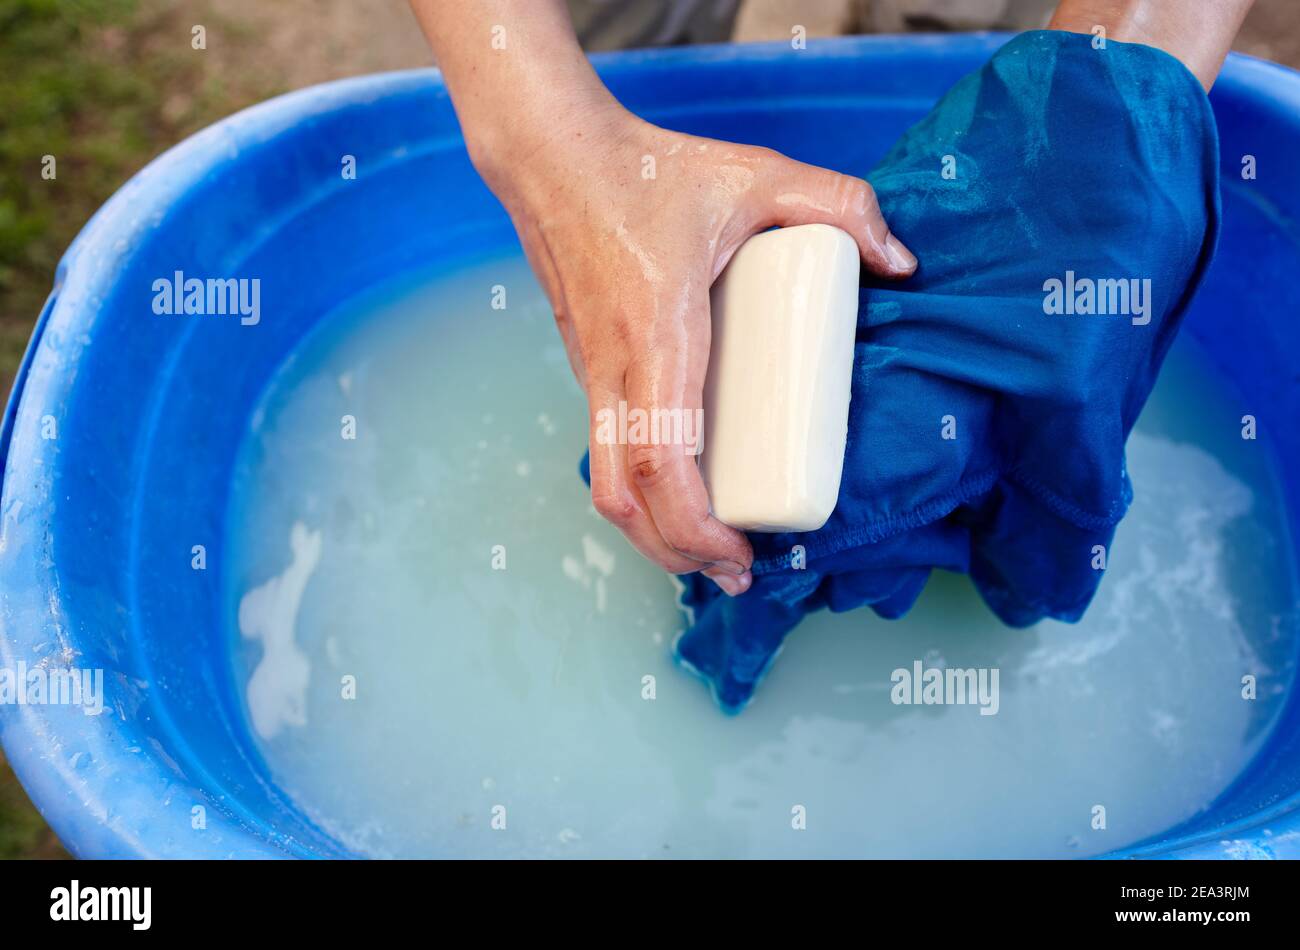 Manual hand washing. Close-up of woman hand washing laundry in blue plastic basin outdoor. Female hands washing clothes in soapy wate Stock Photo